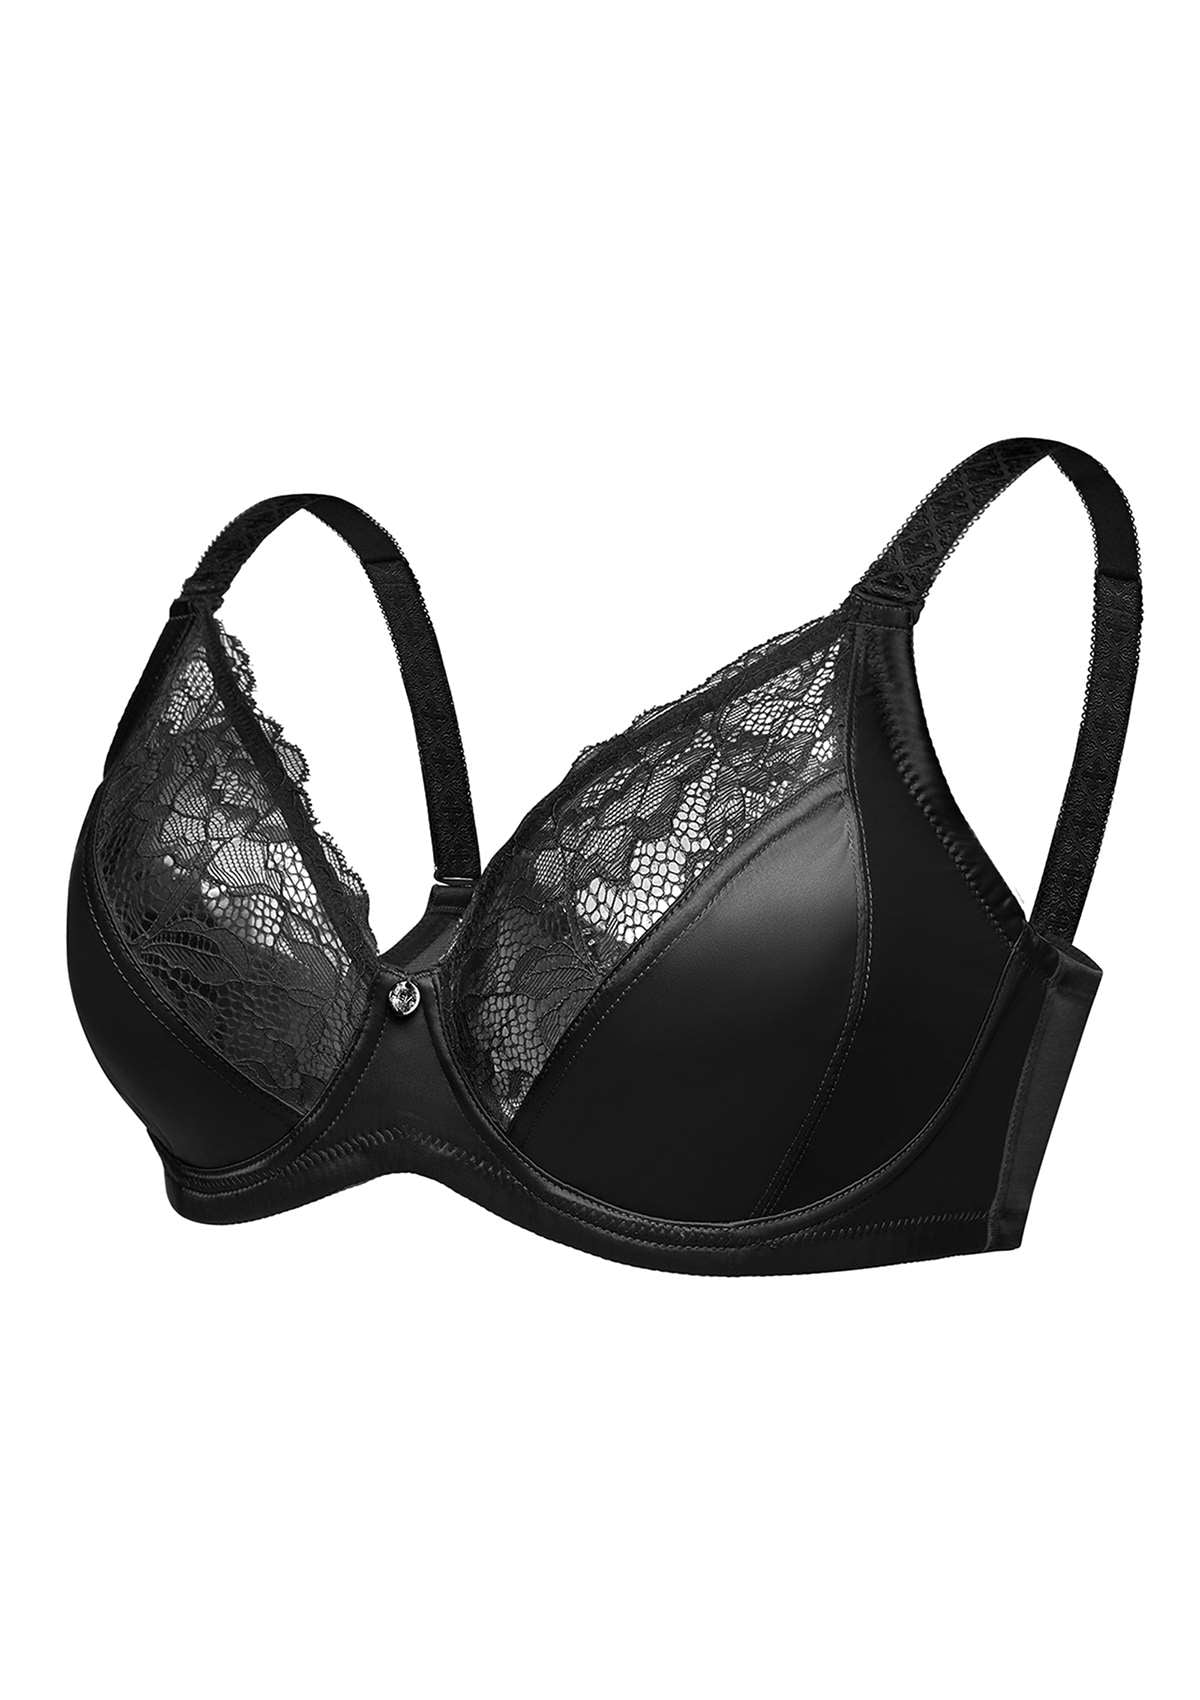 HSIA Foxy Satin Silky Full Coverage Underwire Bra With Floral Lace Trim - Black / 40 / C